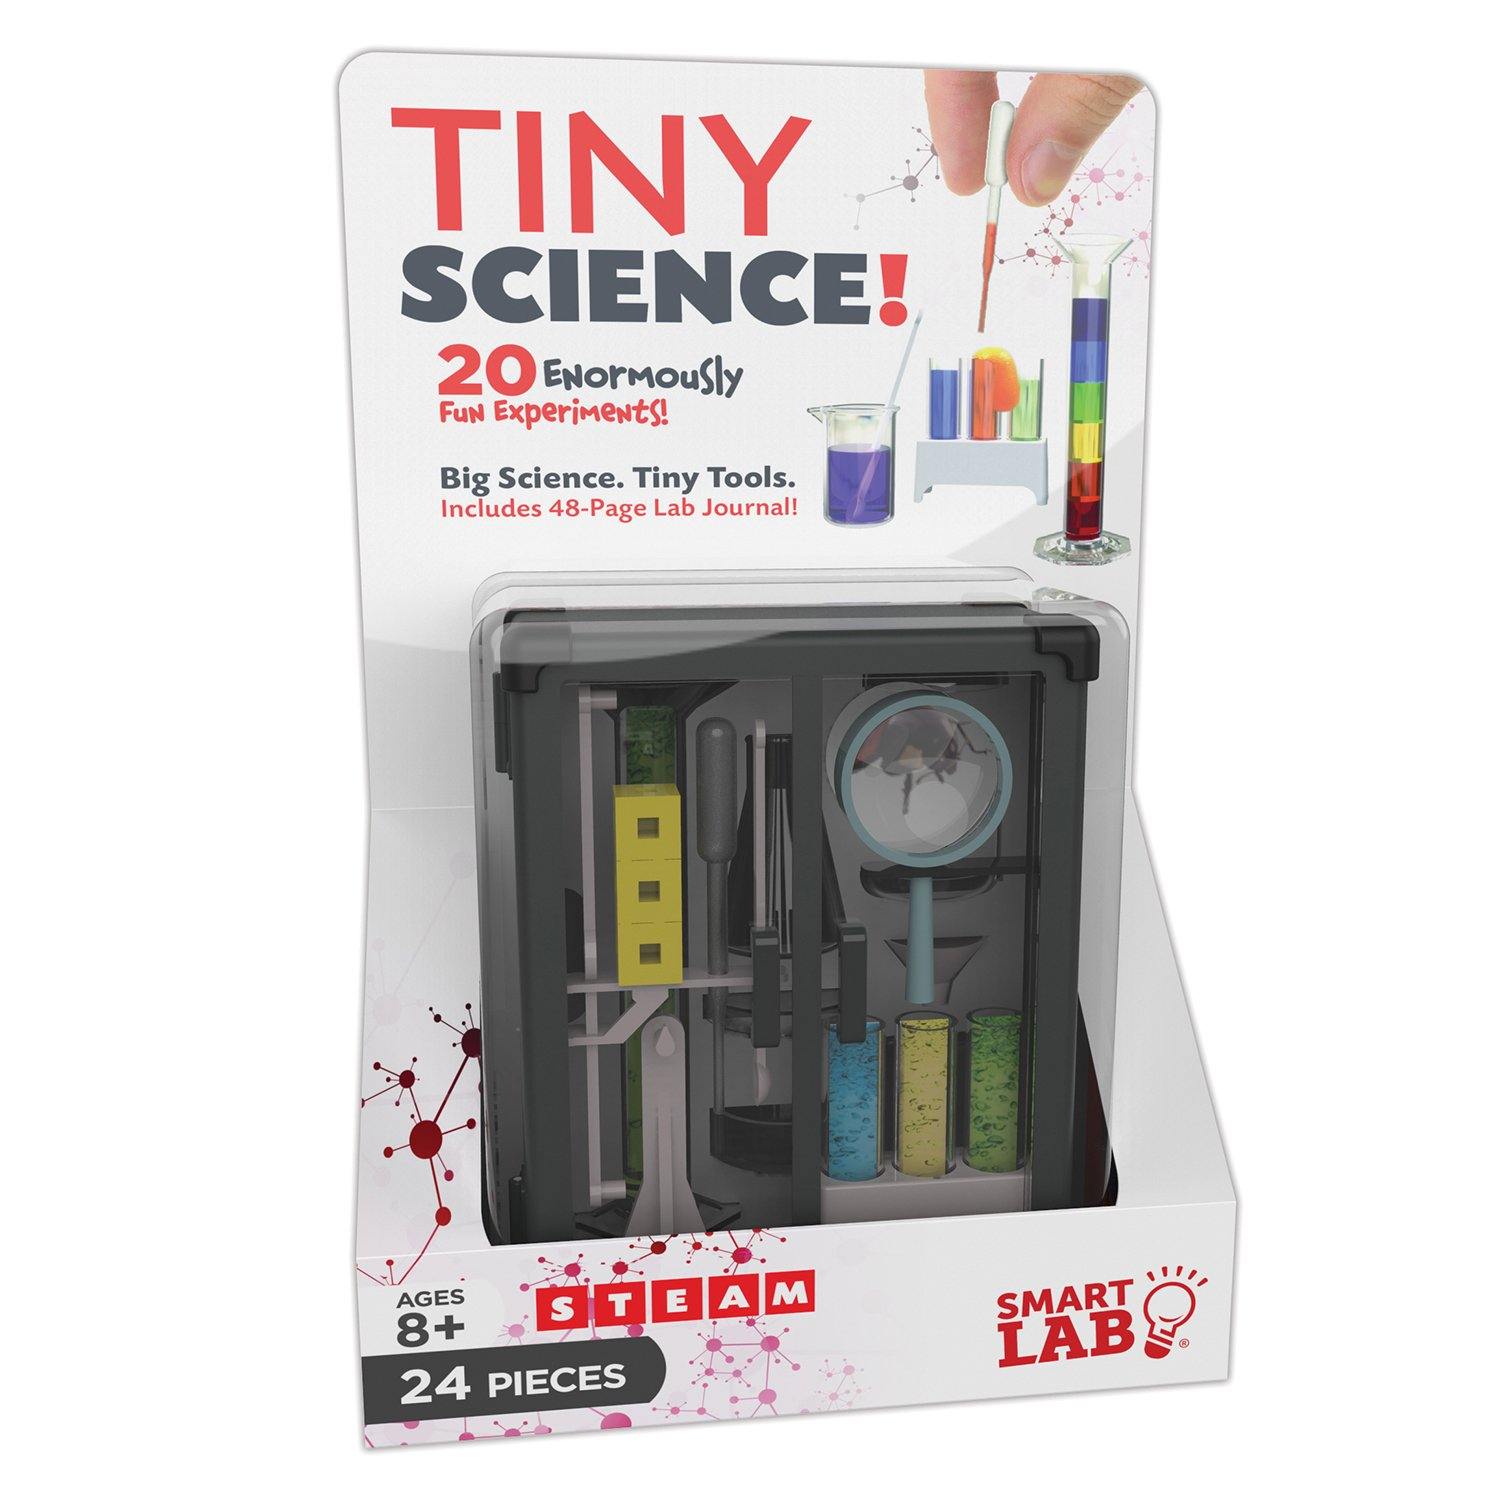 best chemistry set for 11 year old